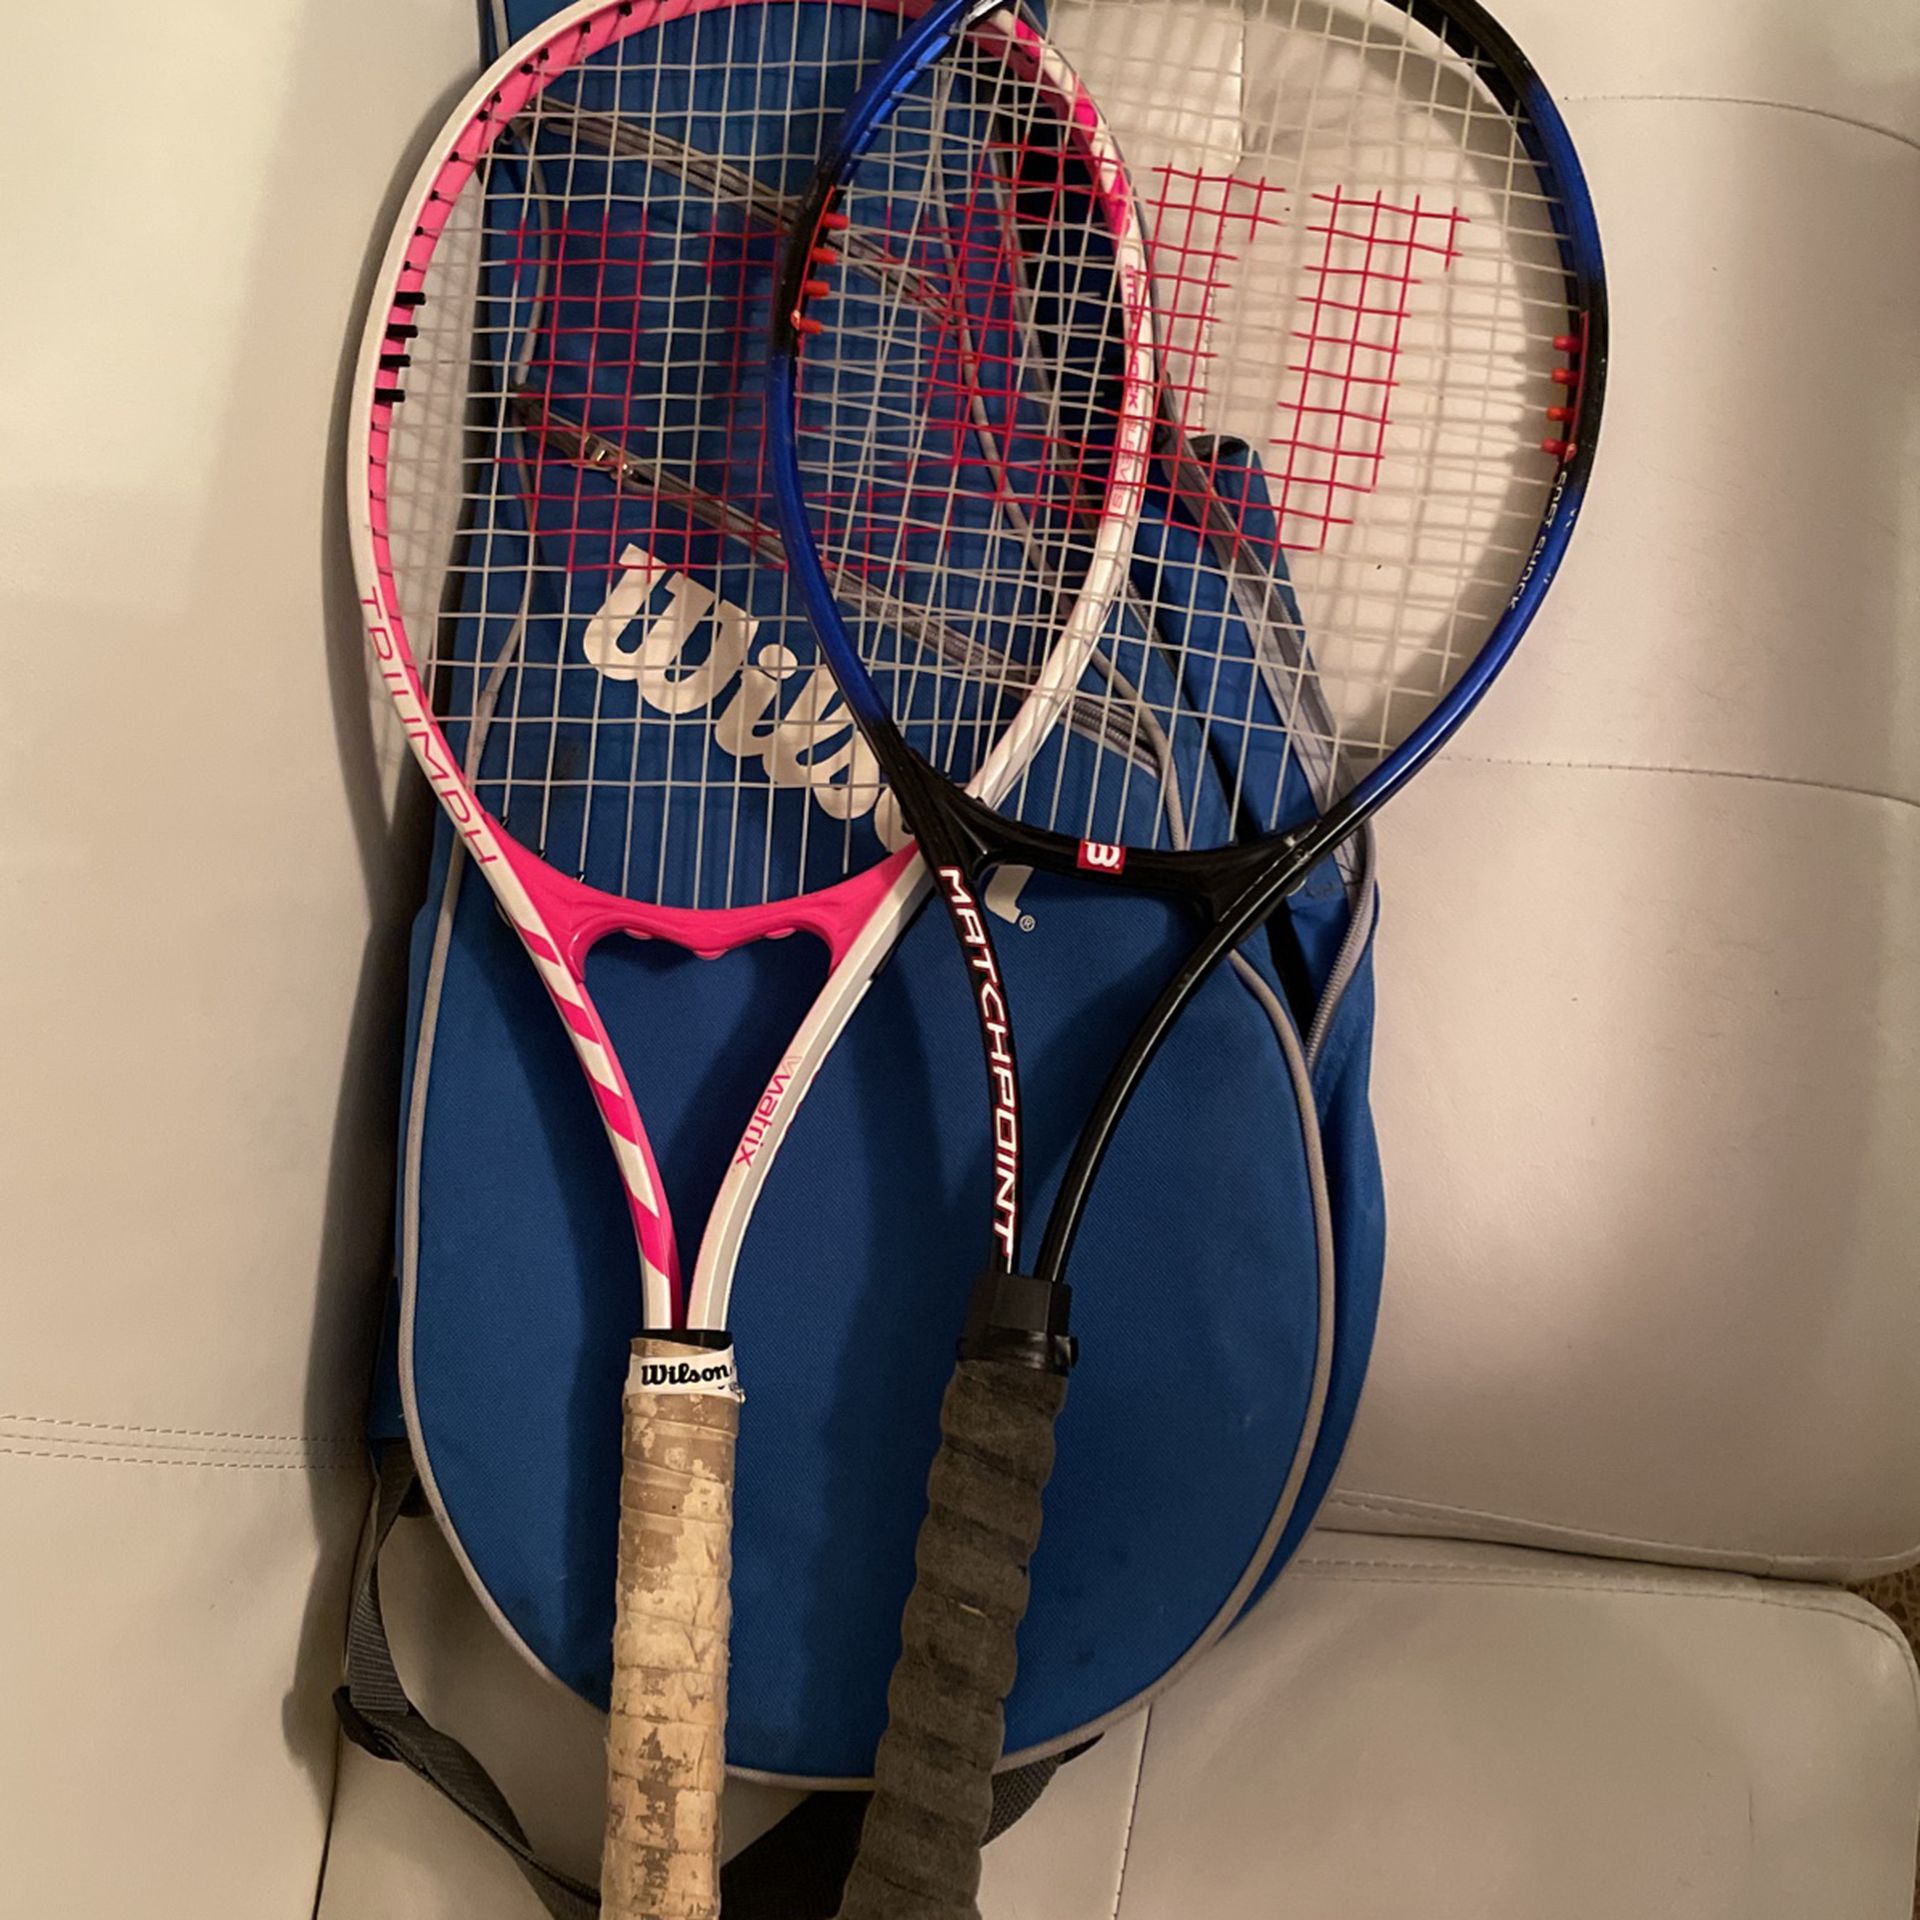 Wilson Two Rackets For Tennis 